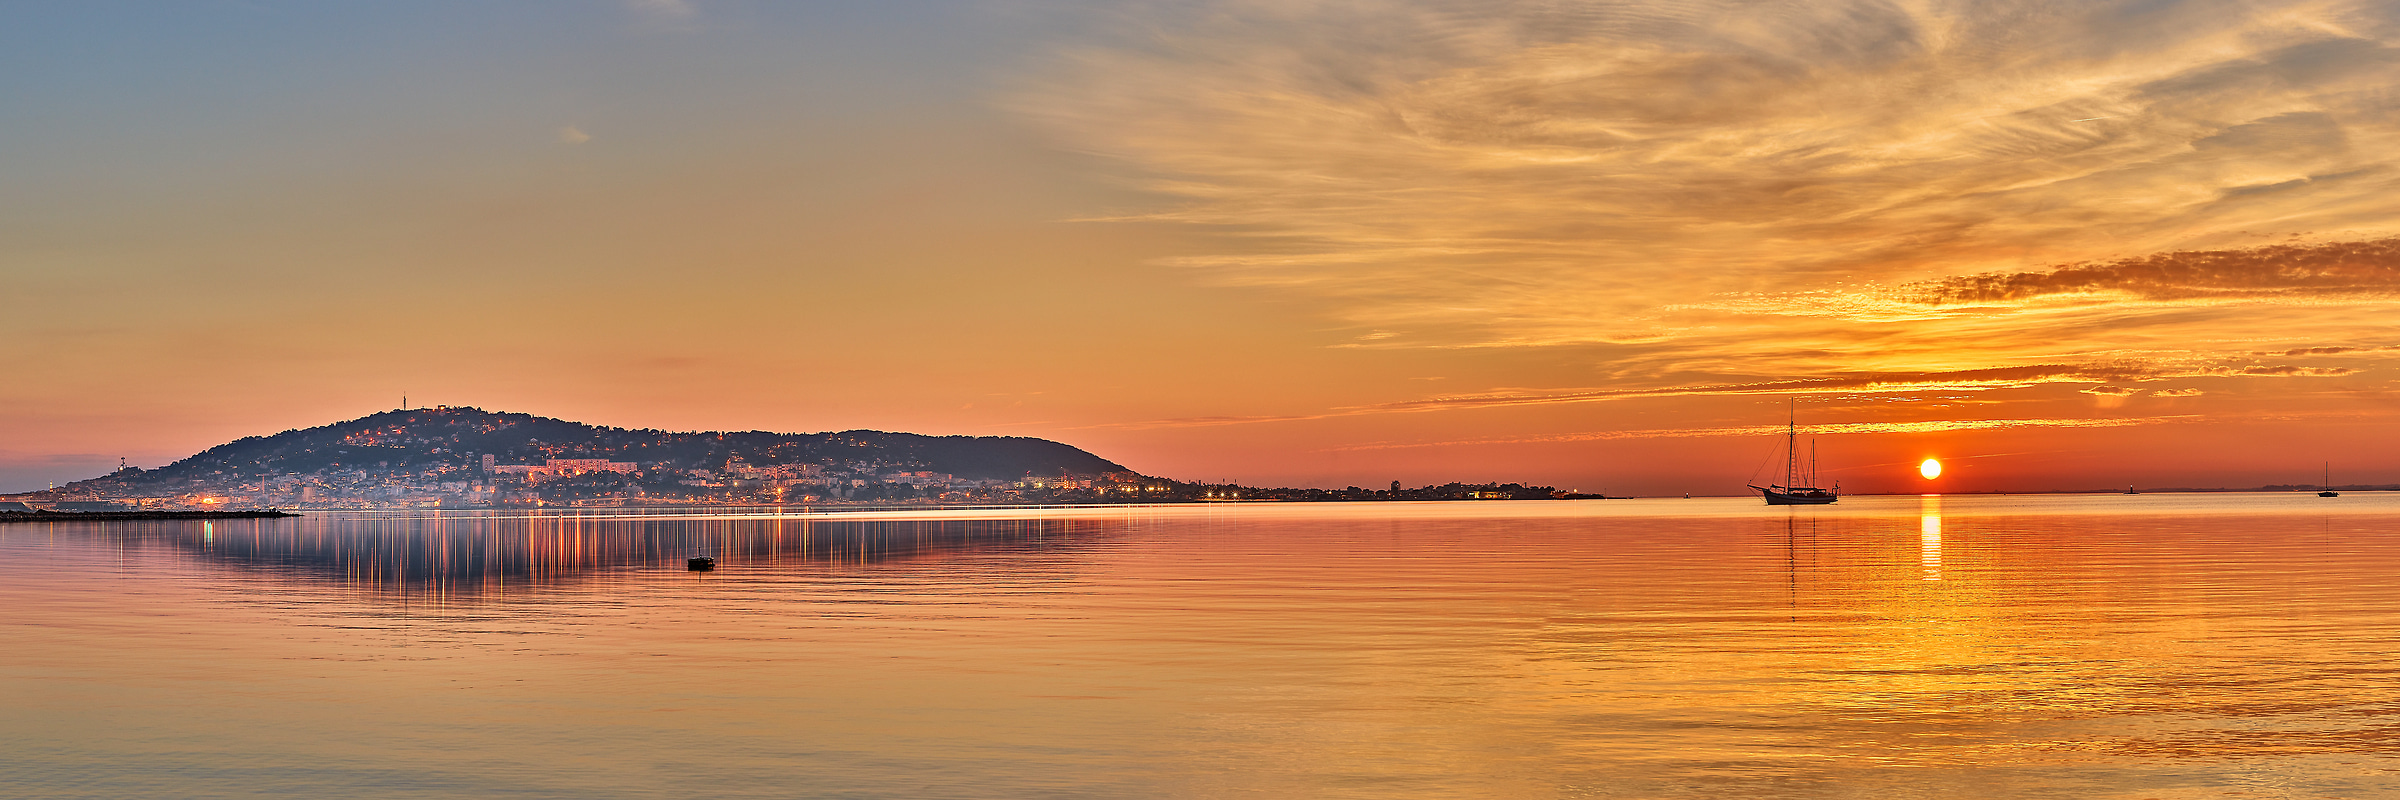 127 megapixels! A very high resolution, large-format VAST photo print of a sailboat on the water in front of a beautiful sunset; photograph created by David Meaux in l'Étang de Thau, Balaruc-les-Bains, l'Hérault, France.